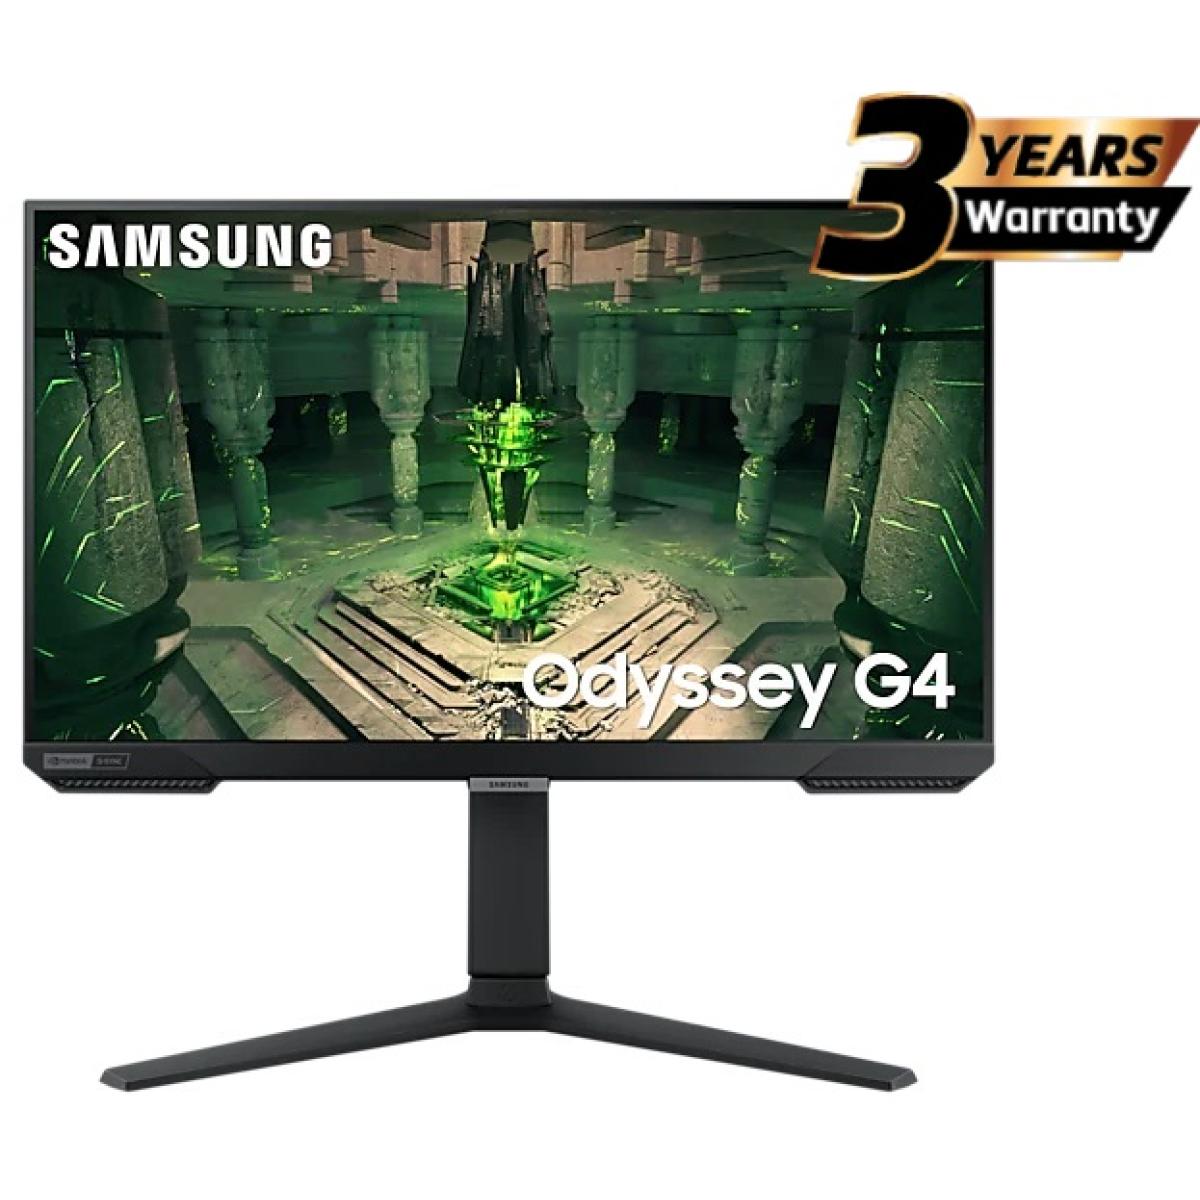 Samsung 25" FHD monitor with IPS panel, 240Hz refresh rate and 1ms response time